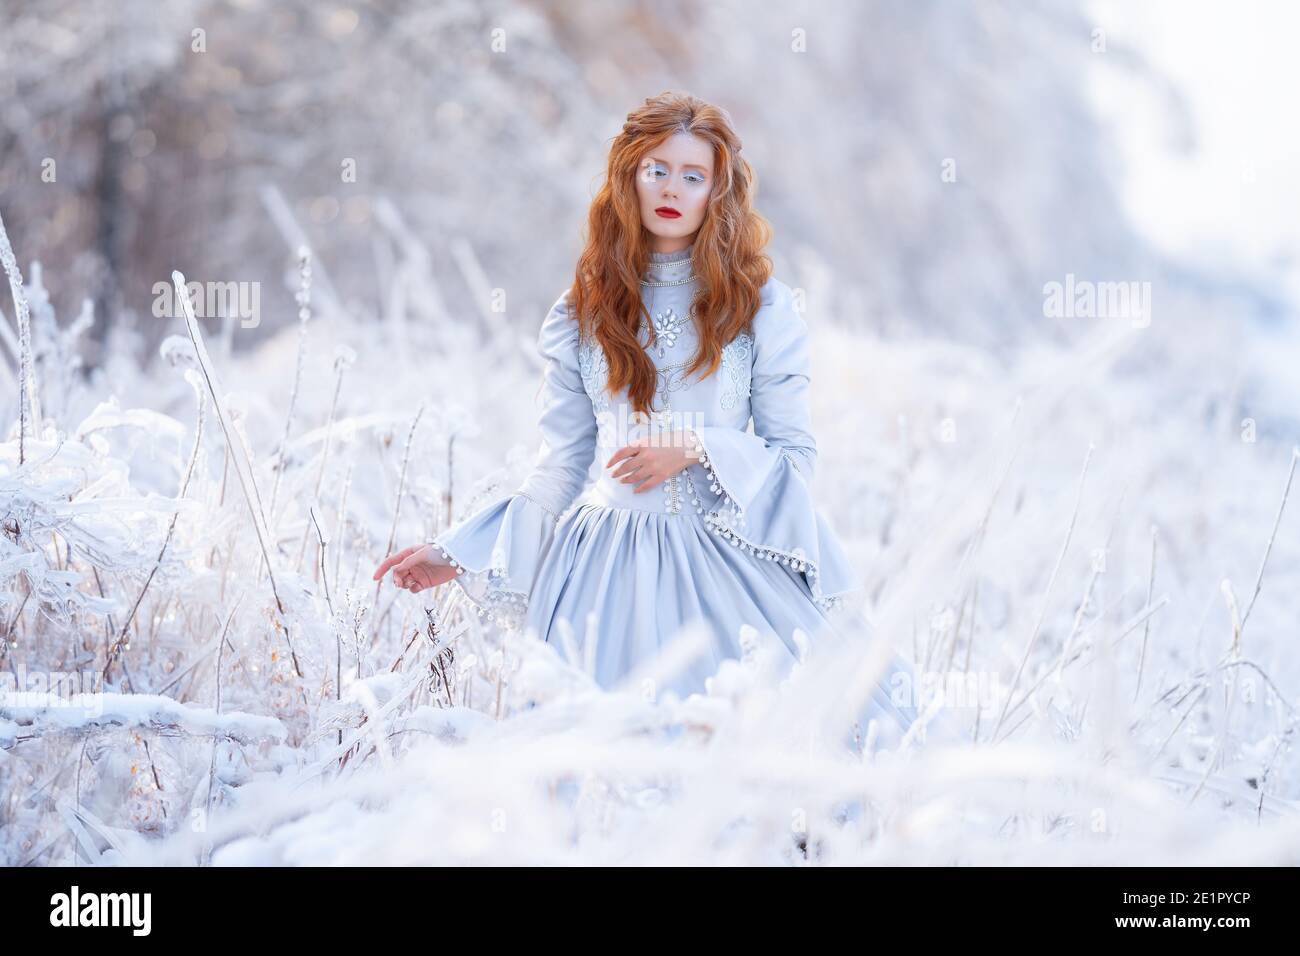 Young Redhead Girl In Flowing Red Dress In Forest With Snowfall. Photograph  by Cavan Images - Fine Art America